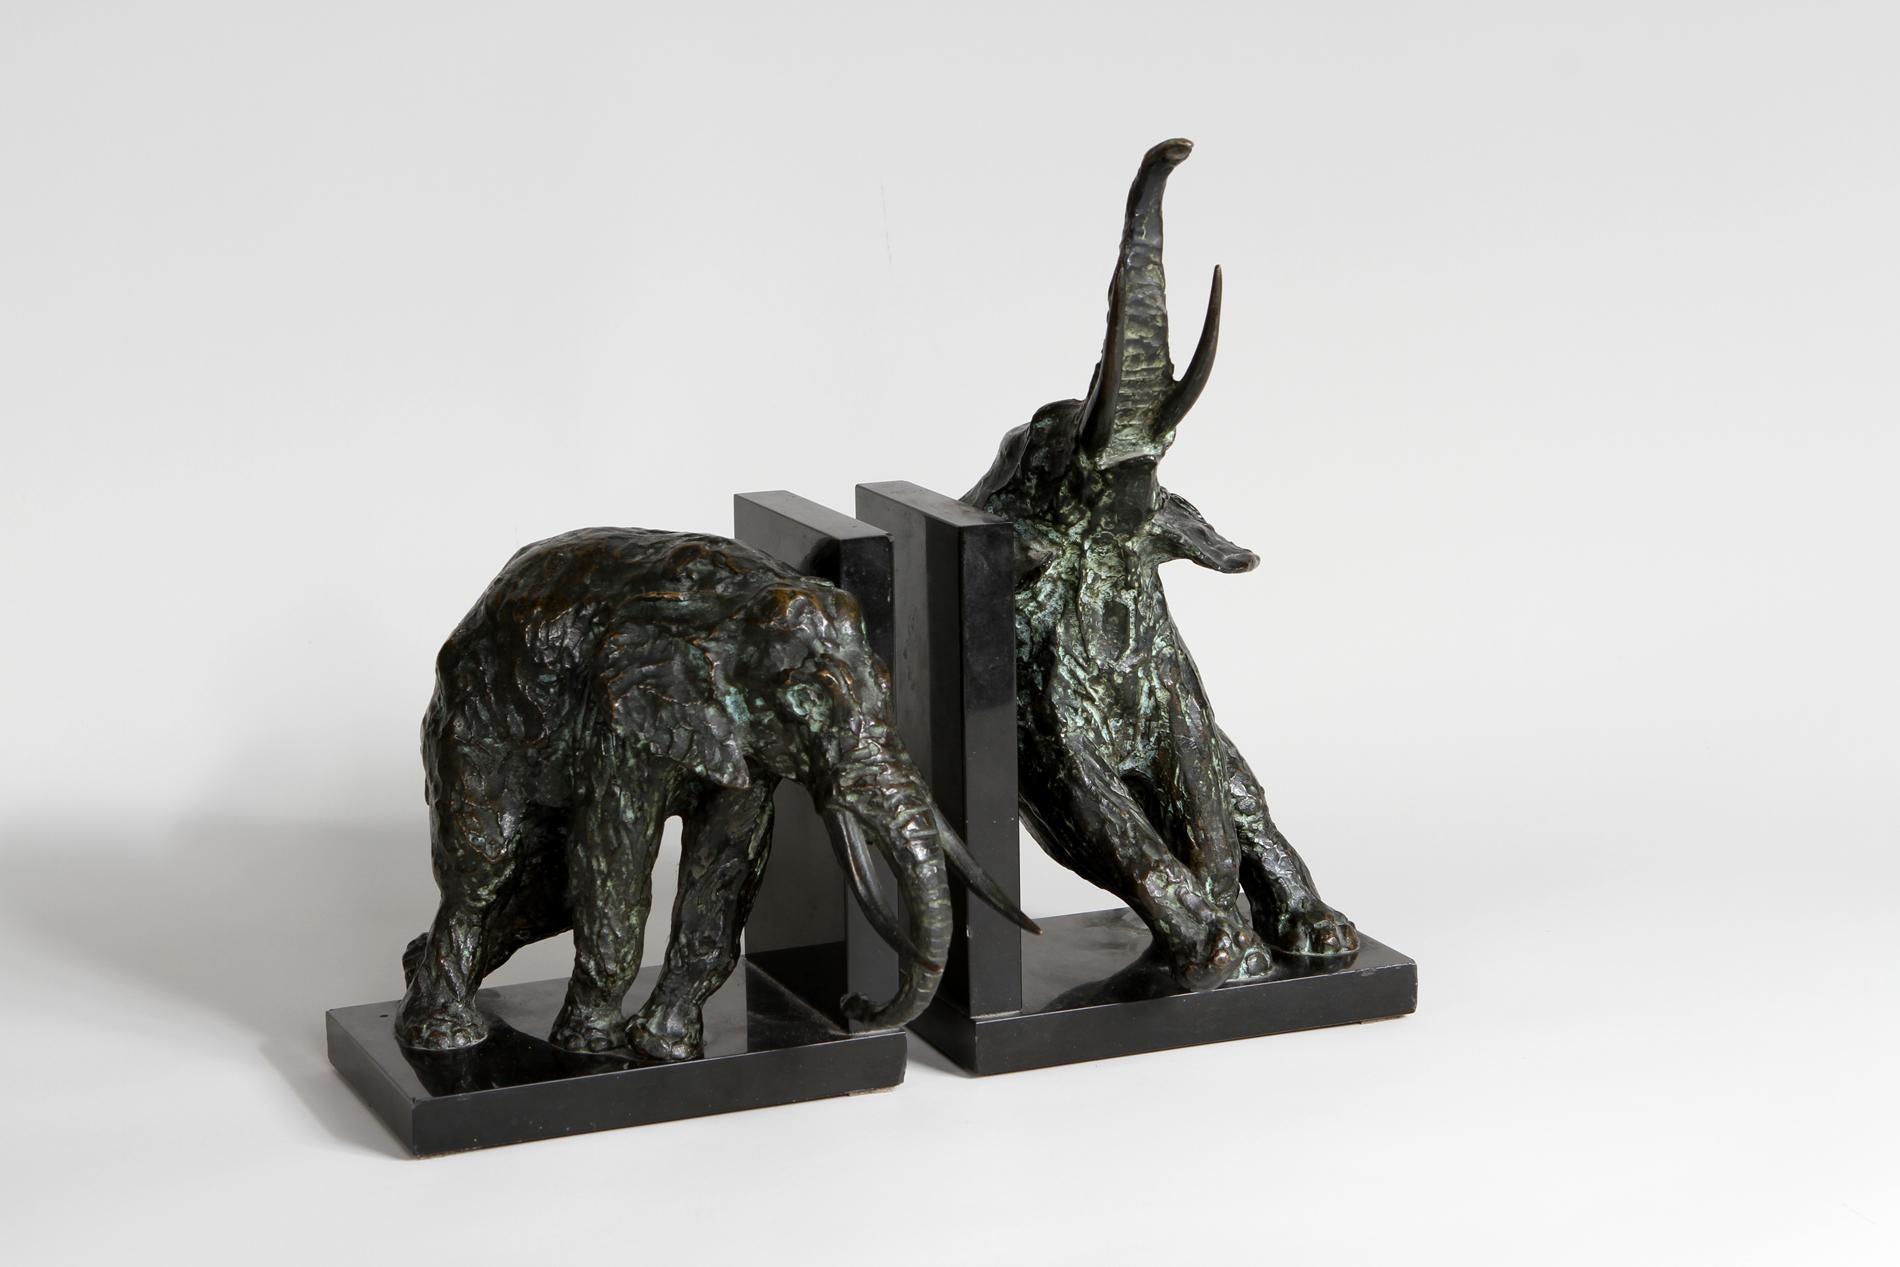 Pair of patinated bronze bookends with black marble base representing two elephants by french artist Ary Bitter, founder Susse frères, stamped on the side. 

Incredible and massive piece representing perfectly the movement of the artist. The piece